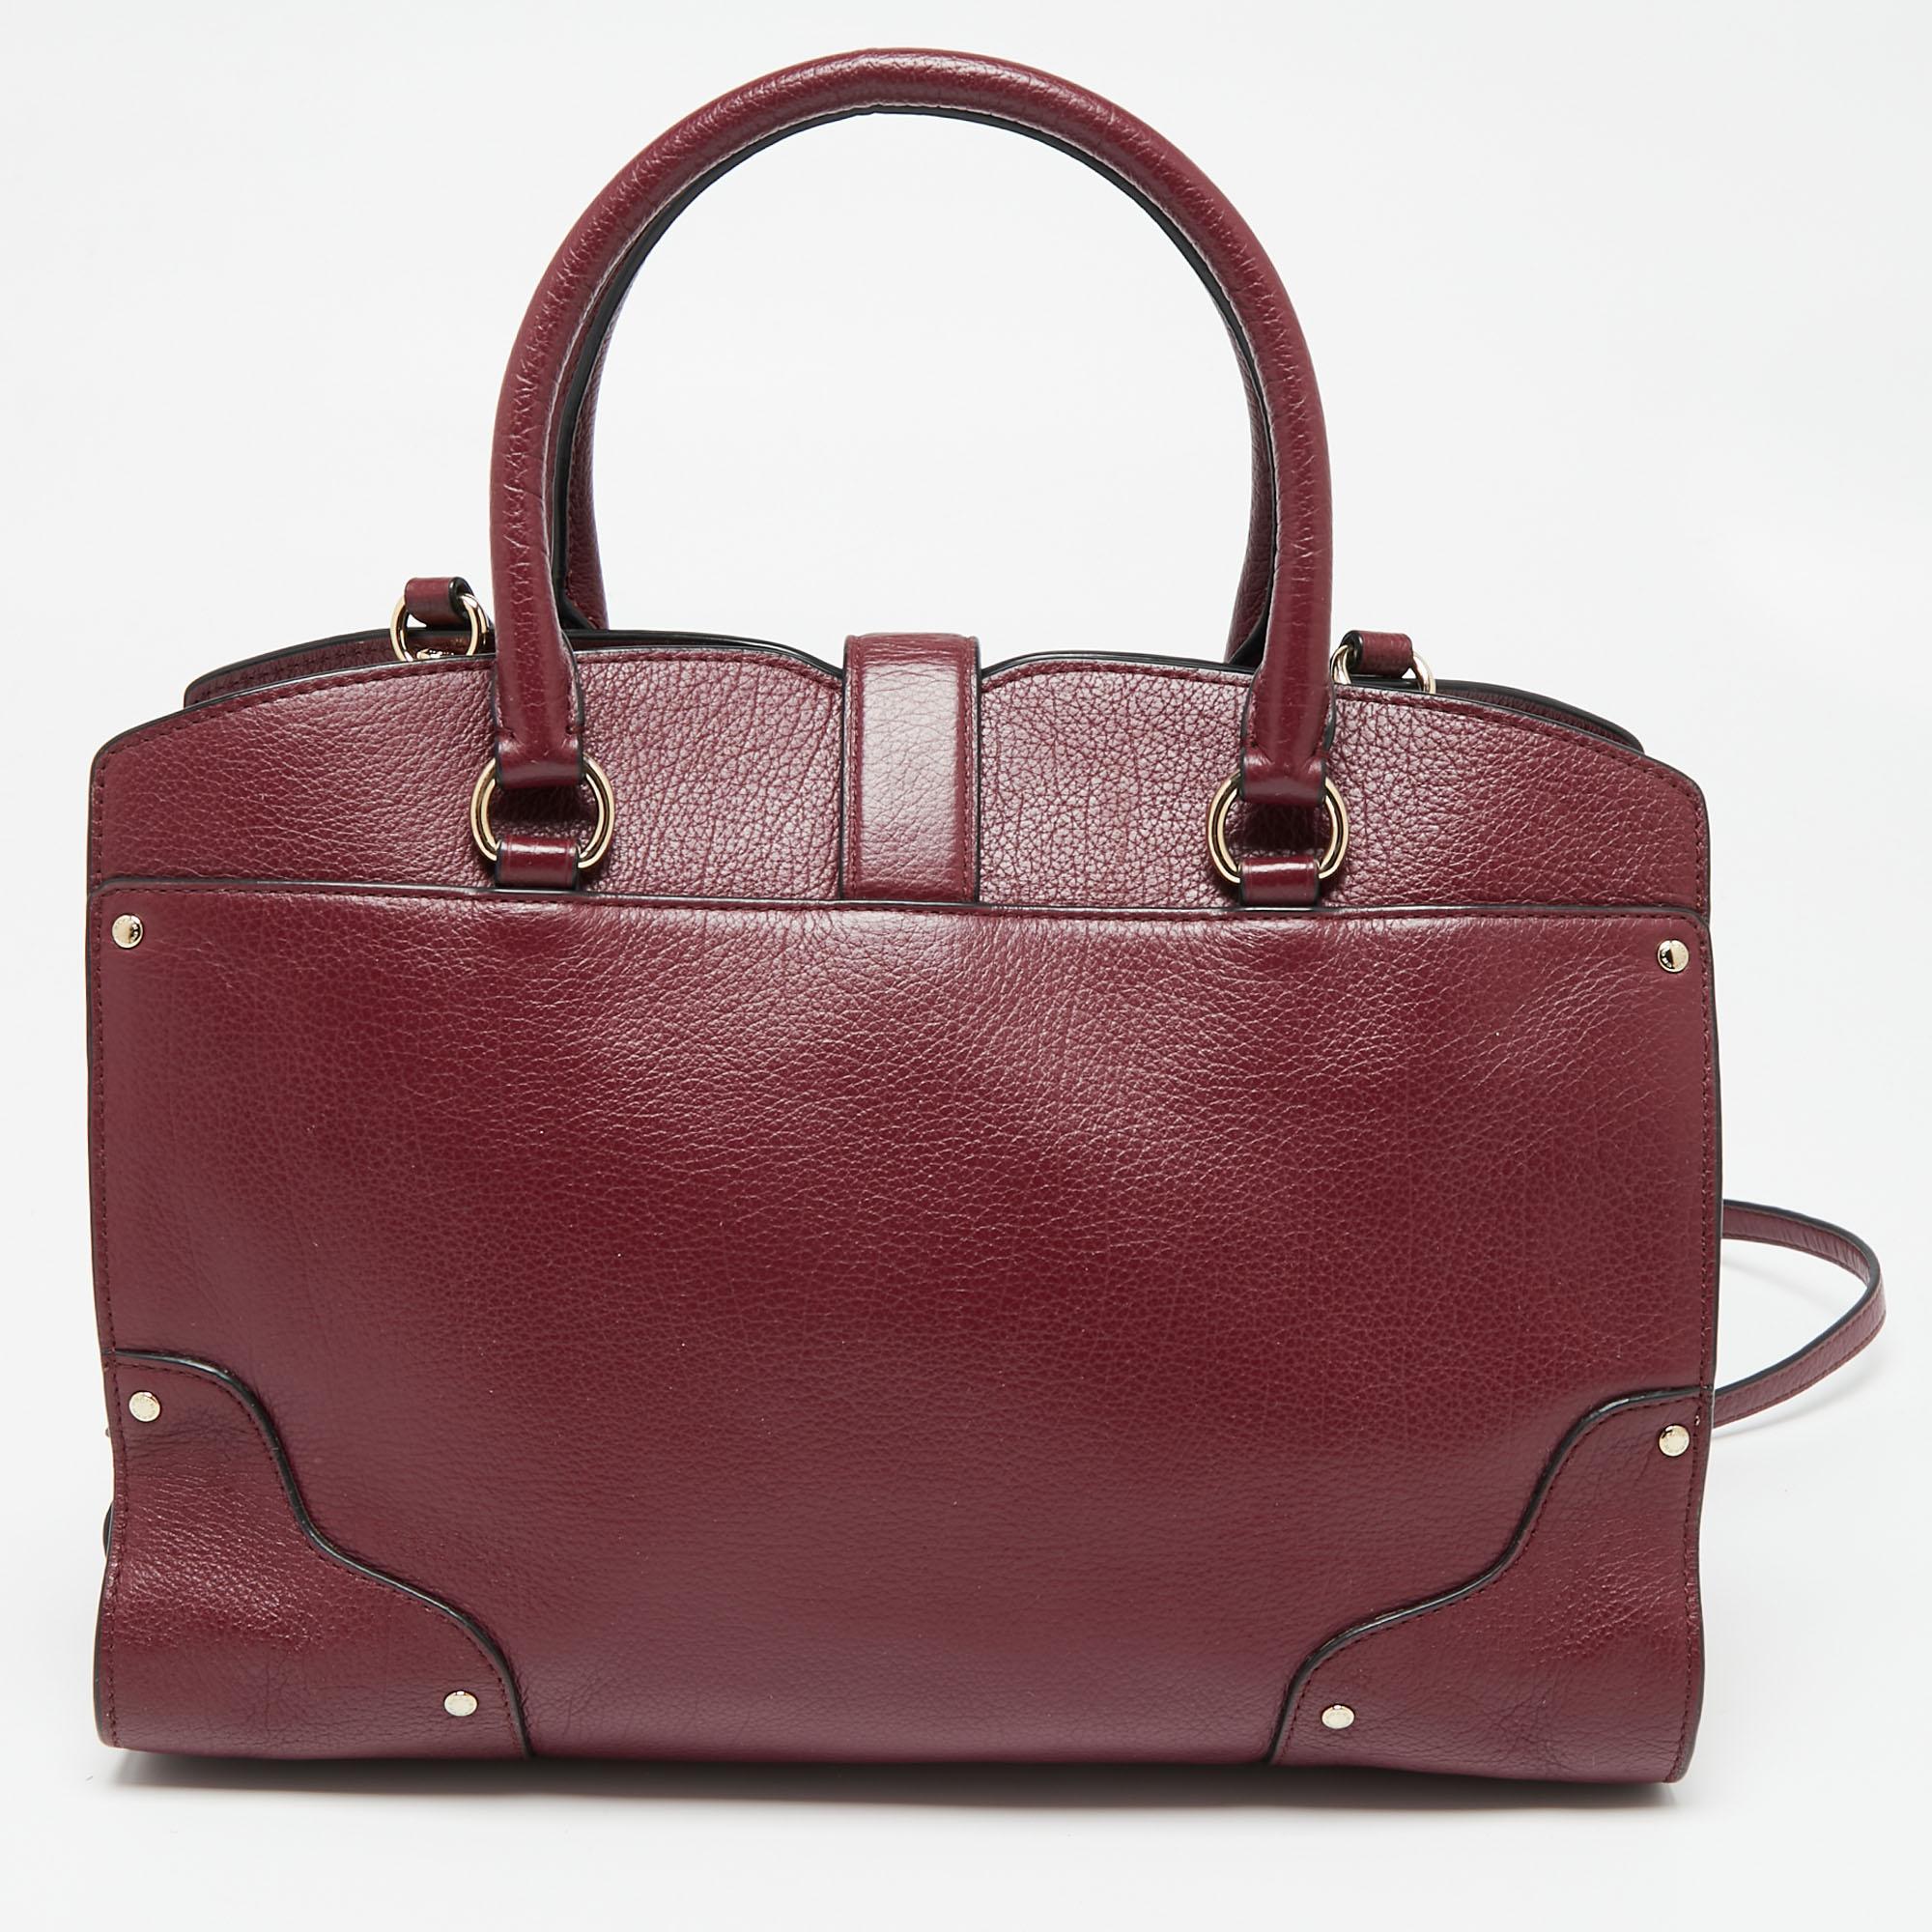 Crafted in premium leather, this impressive piece is an amazing creation to own. Get yourself this Coach handbag in a pretty shade of burgundy to showcase a fashion-forward taste. It is adorned with a turn-lock closure and gold-tone logo detail at